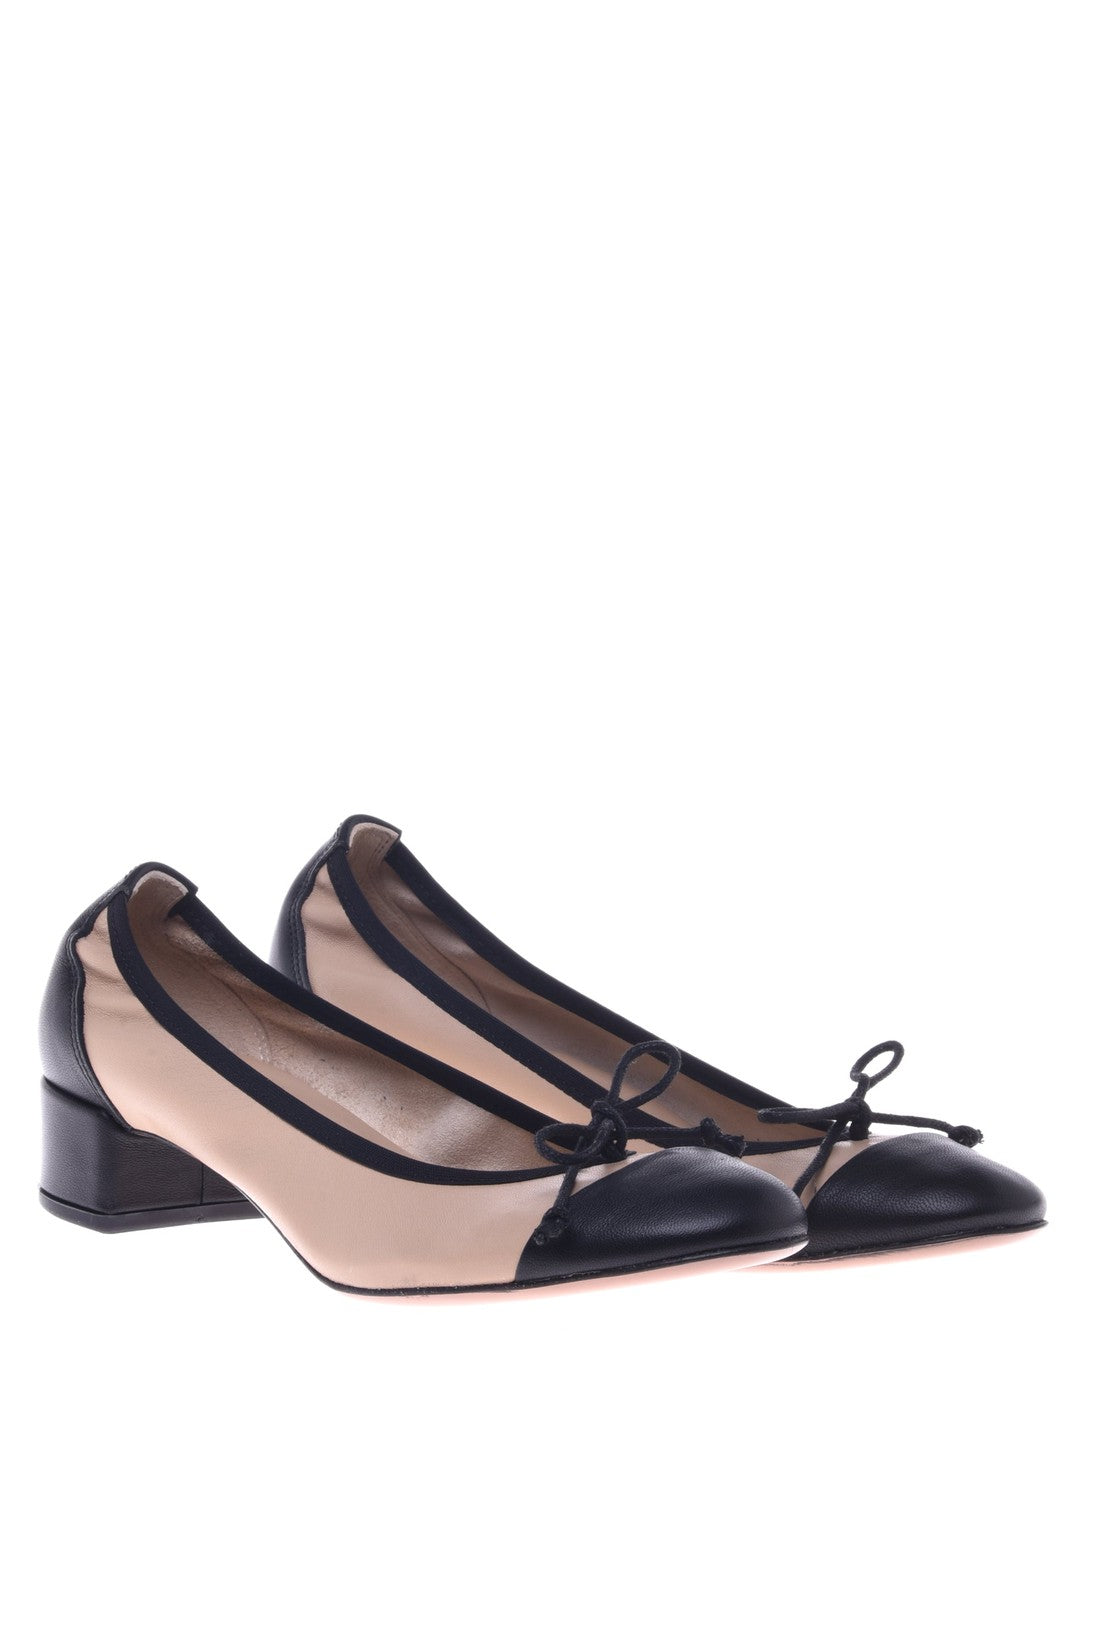 BALDININI-OUTLET-SALE-Ballerina-pump-in-black-and-powder-nappa-leather-Halbschuhe-ARCHIVE-COLLECTION-3.jpg